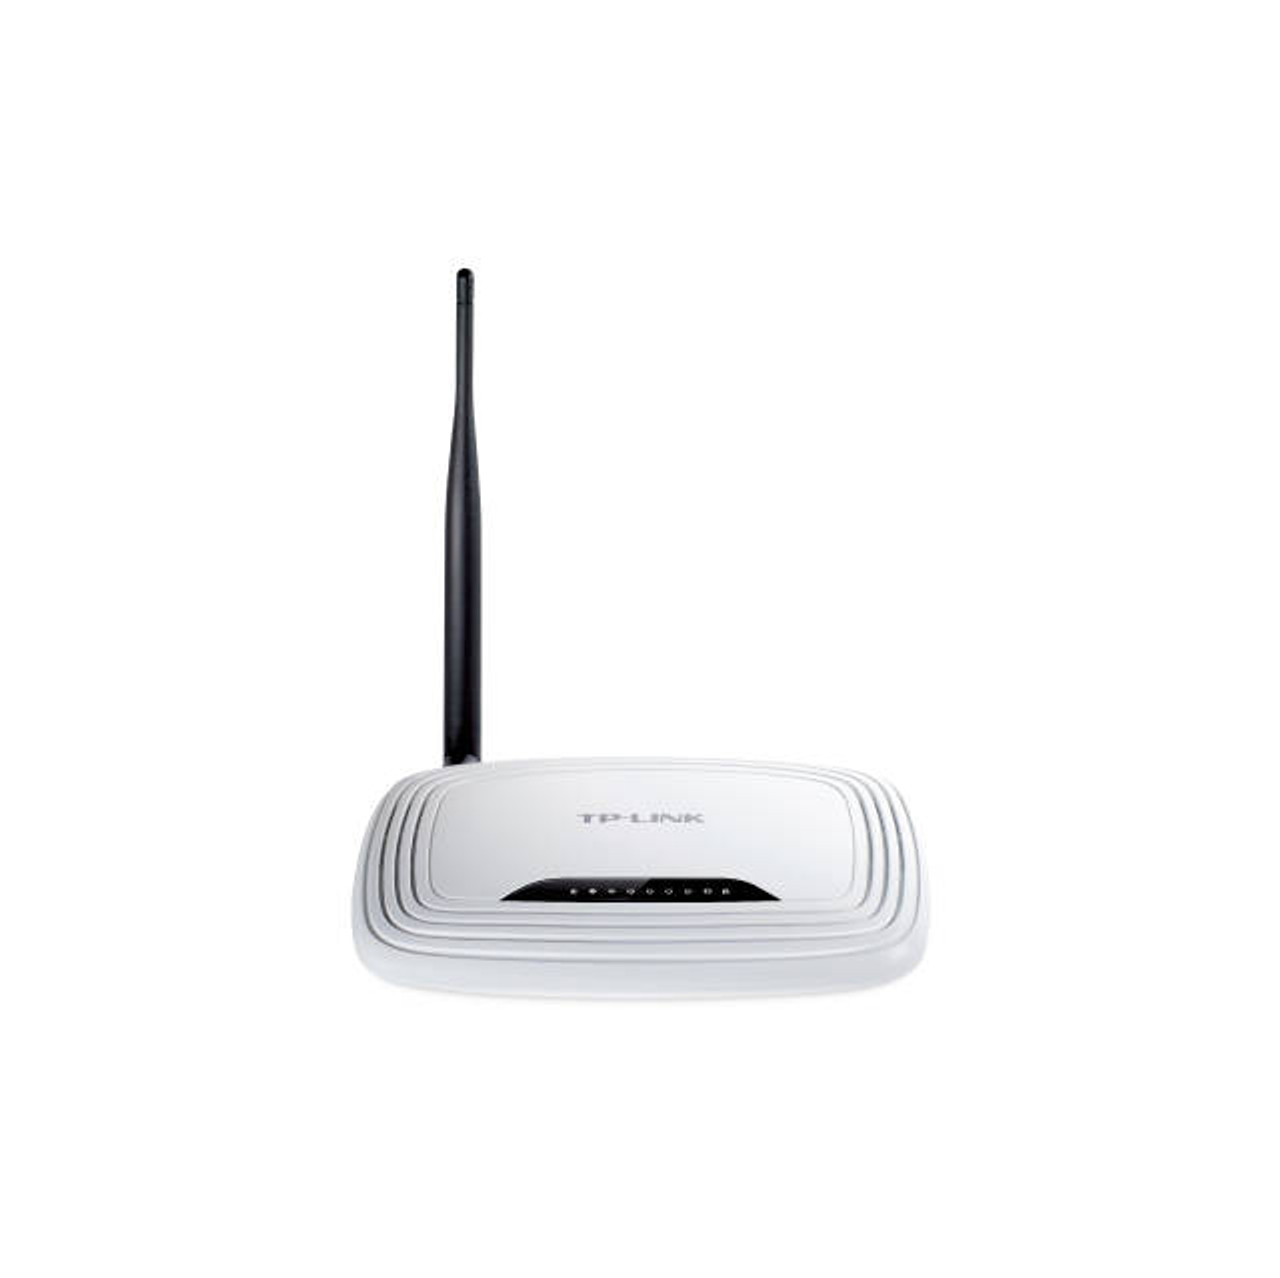 TP-Link TL-WR740N 150Mbps Wireless N Router w/ Fixed 5dBi Antennas